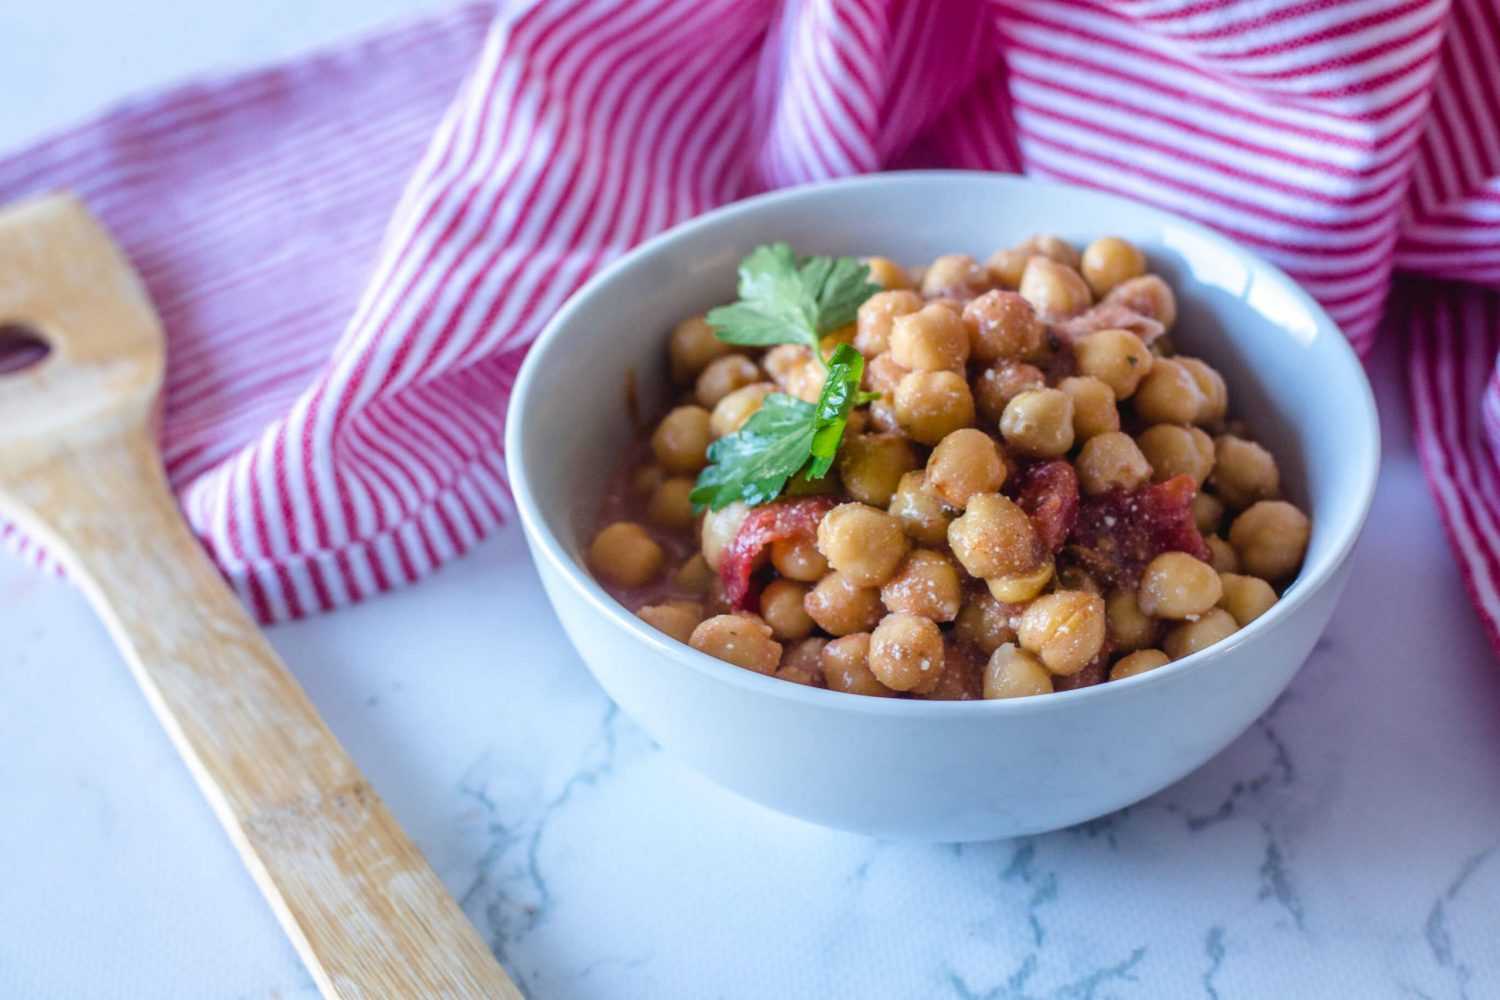 Chana masala with chickpeas, chopped tomatoes, parsley and spices in white bowl